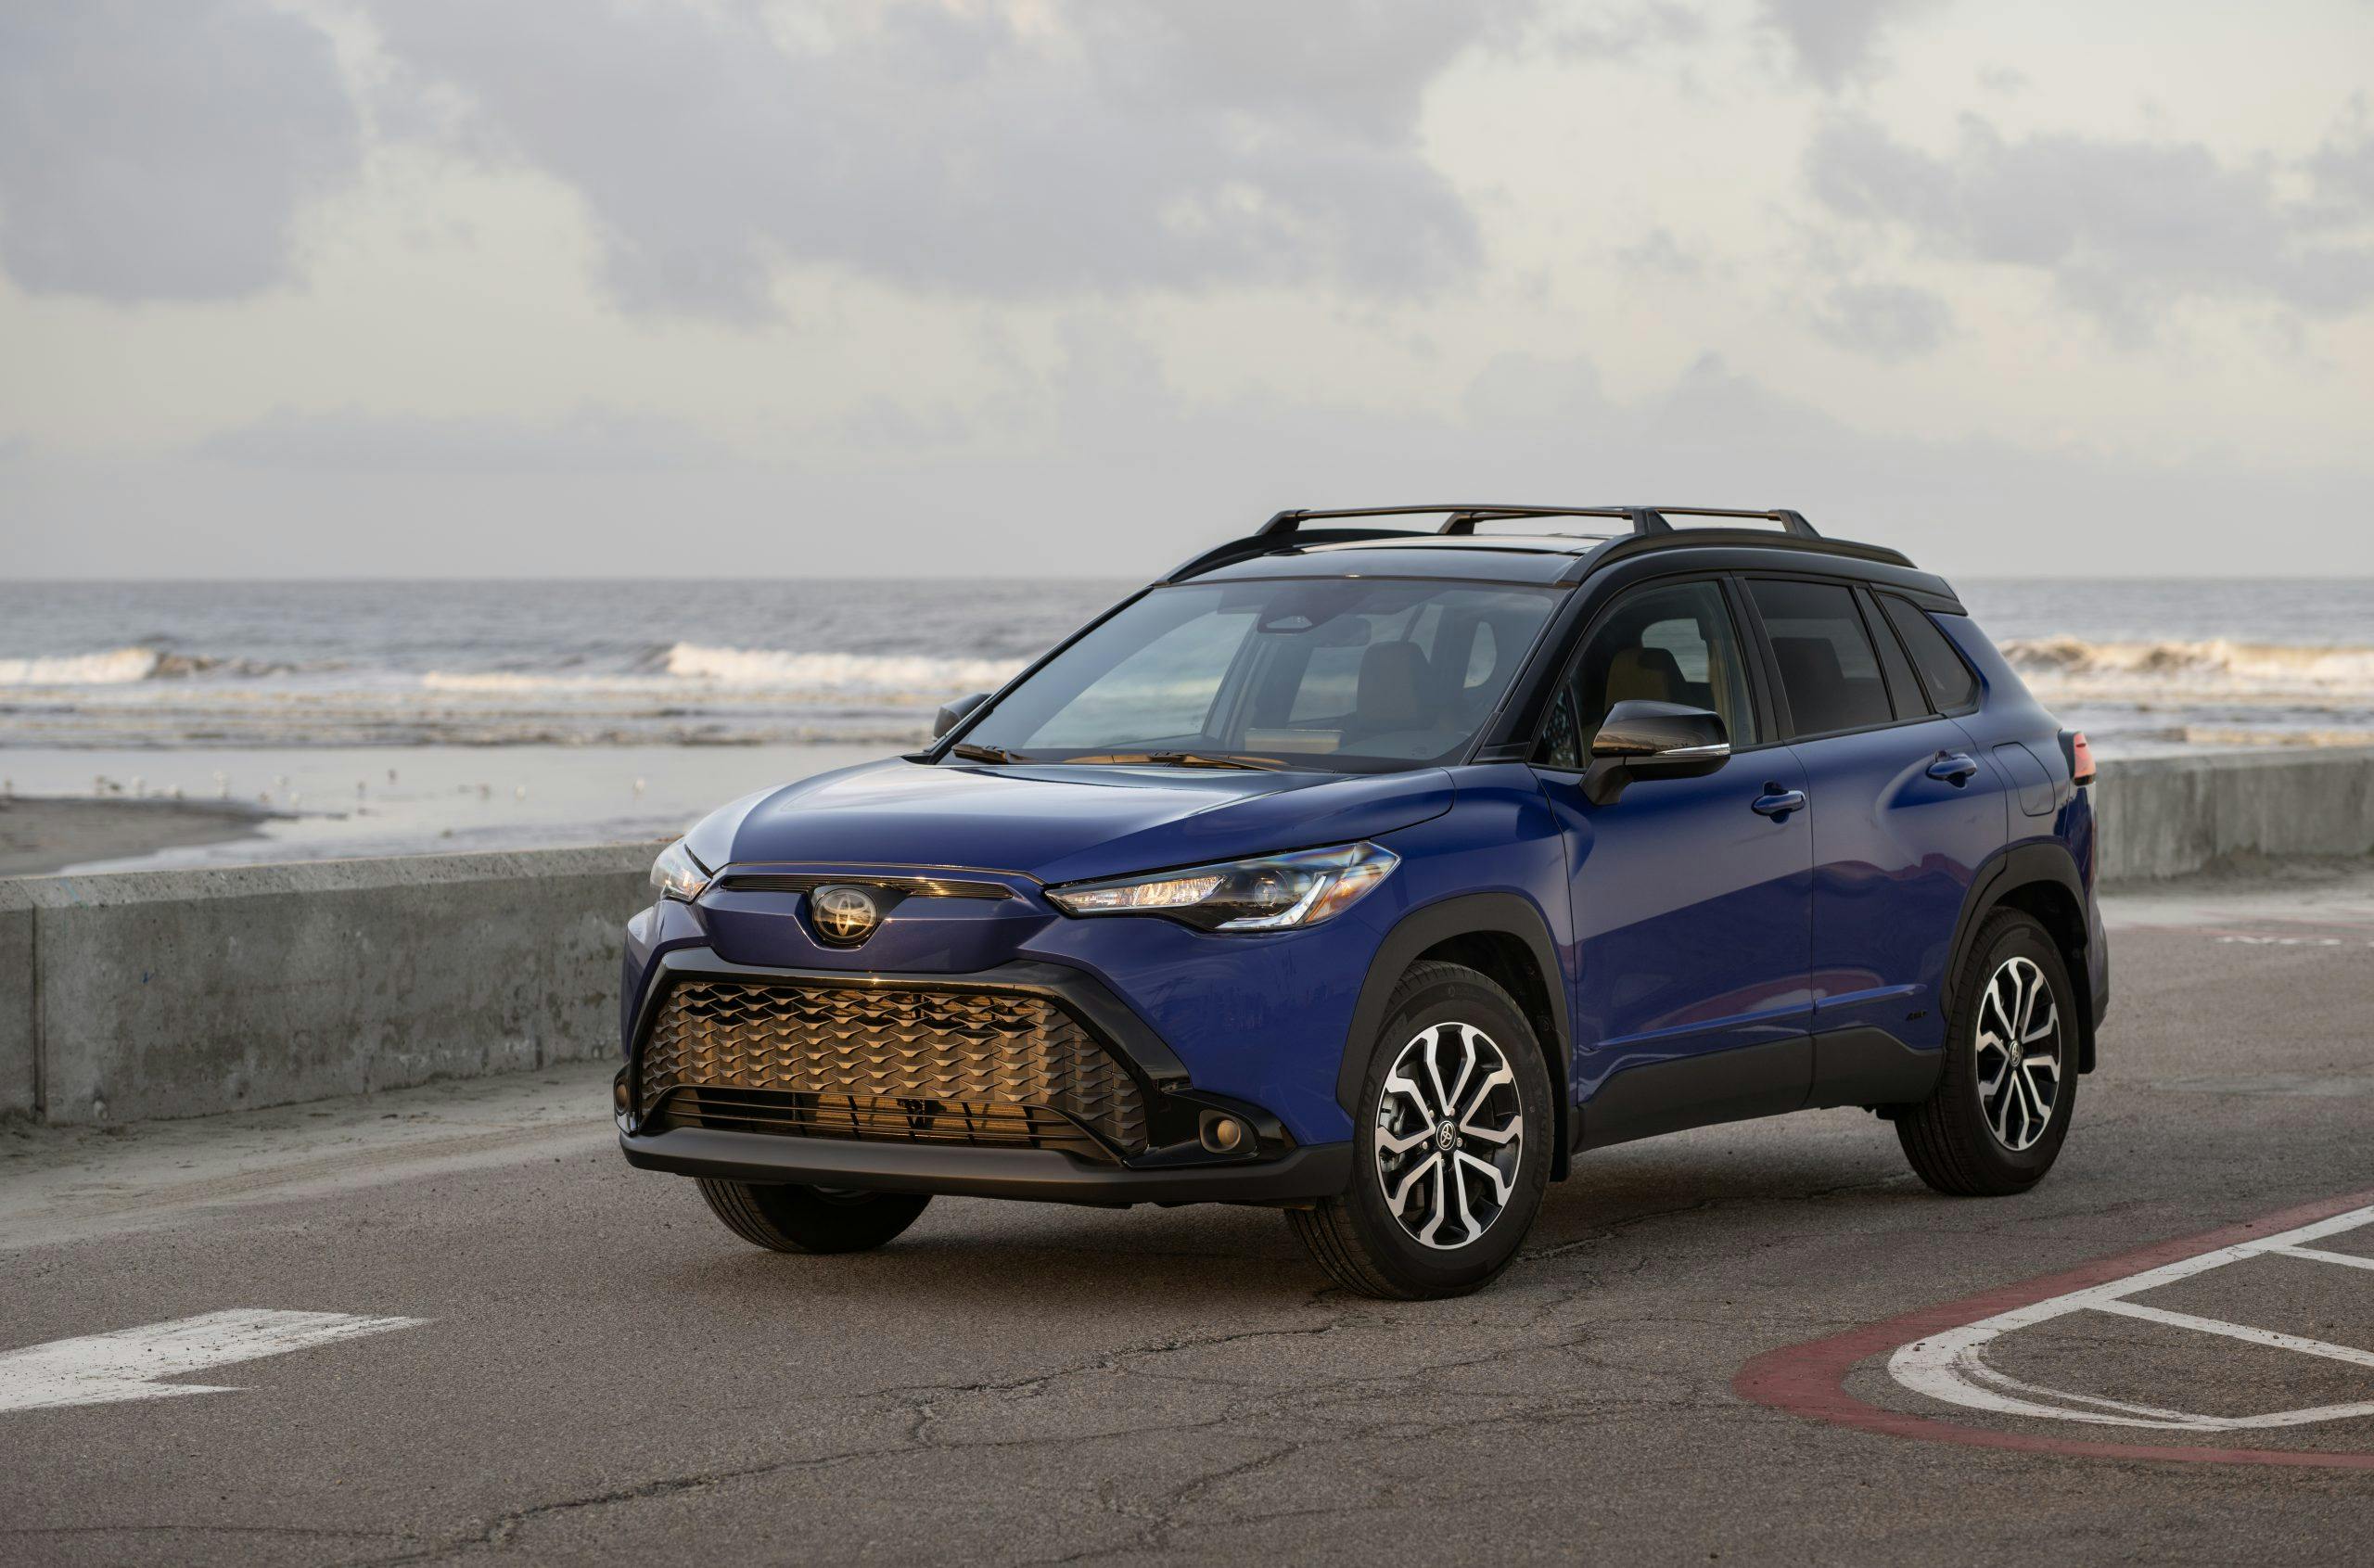 Auto review: 2023 Toyota Corolla hybrid is a fuel-efficient